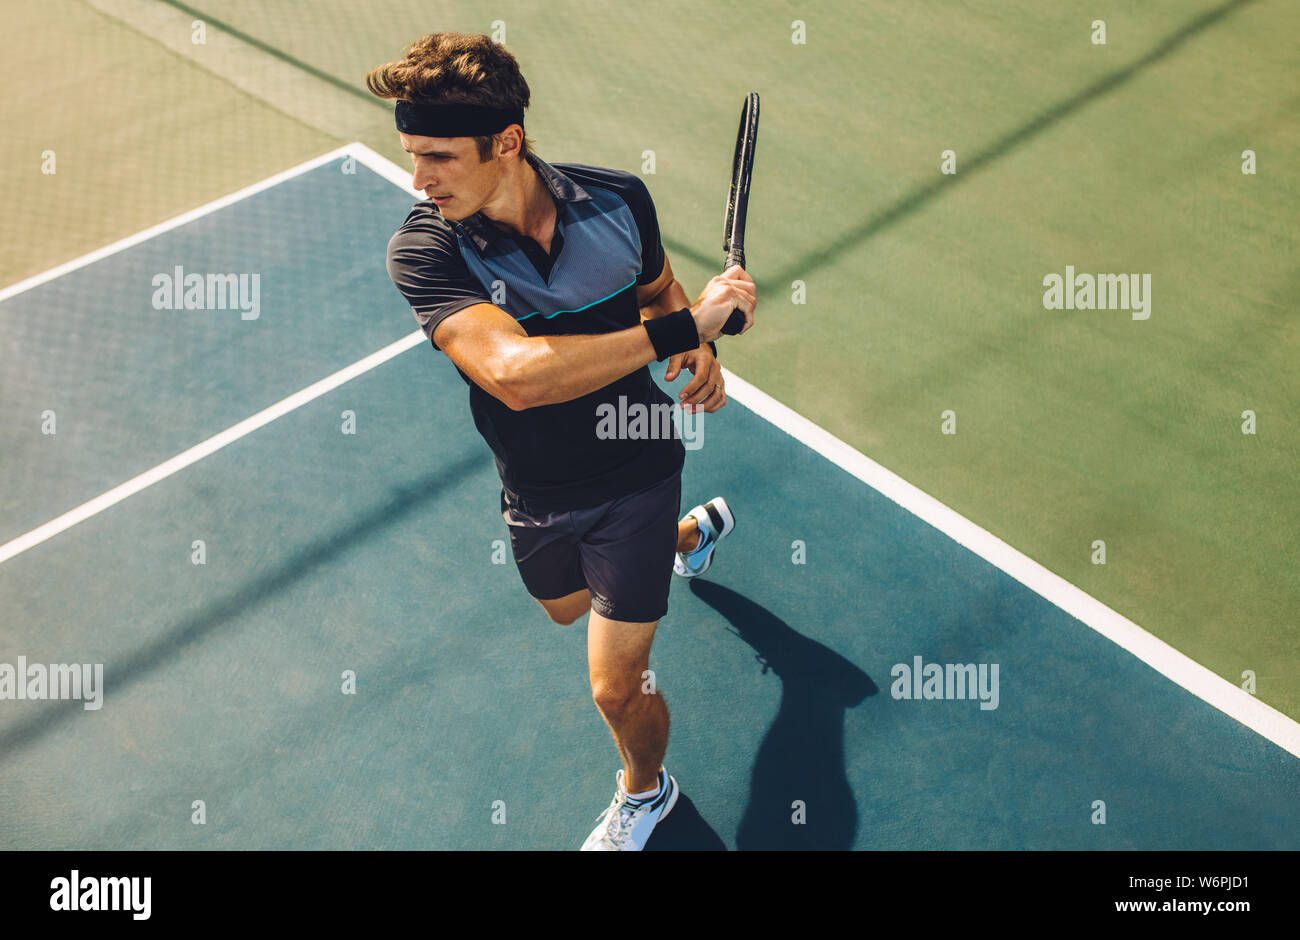 Focused young male tennis player hitting a forehand. Tennis player playing a match on hard court. Stock Photo